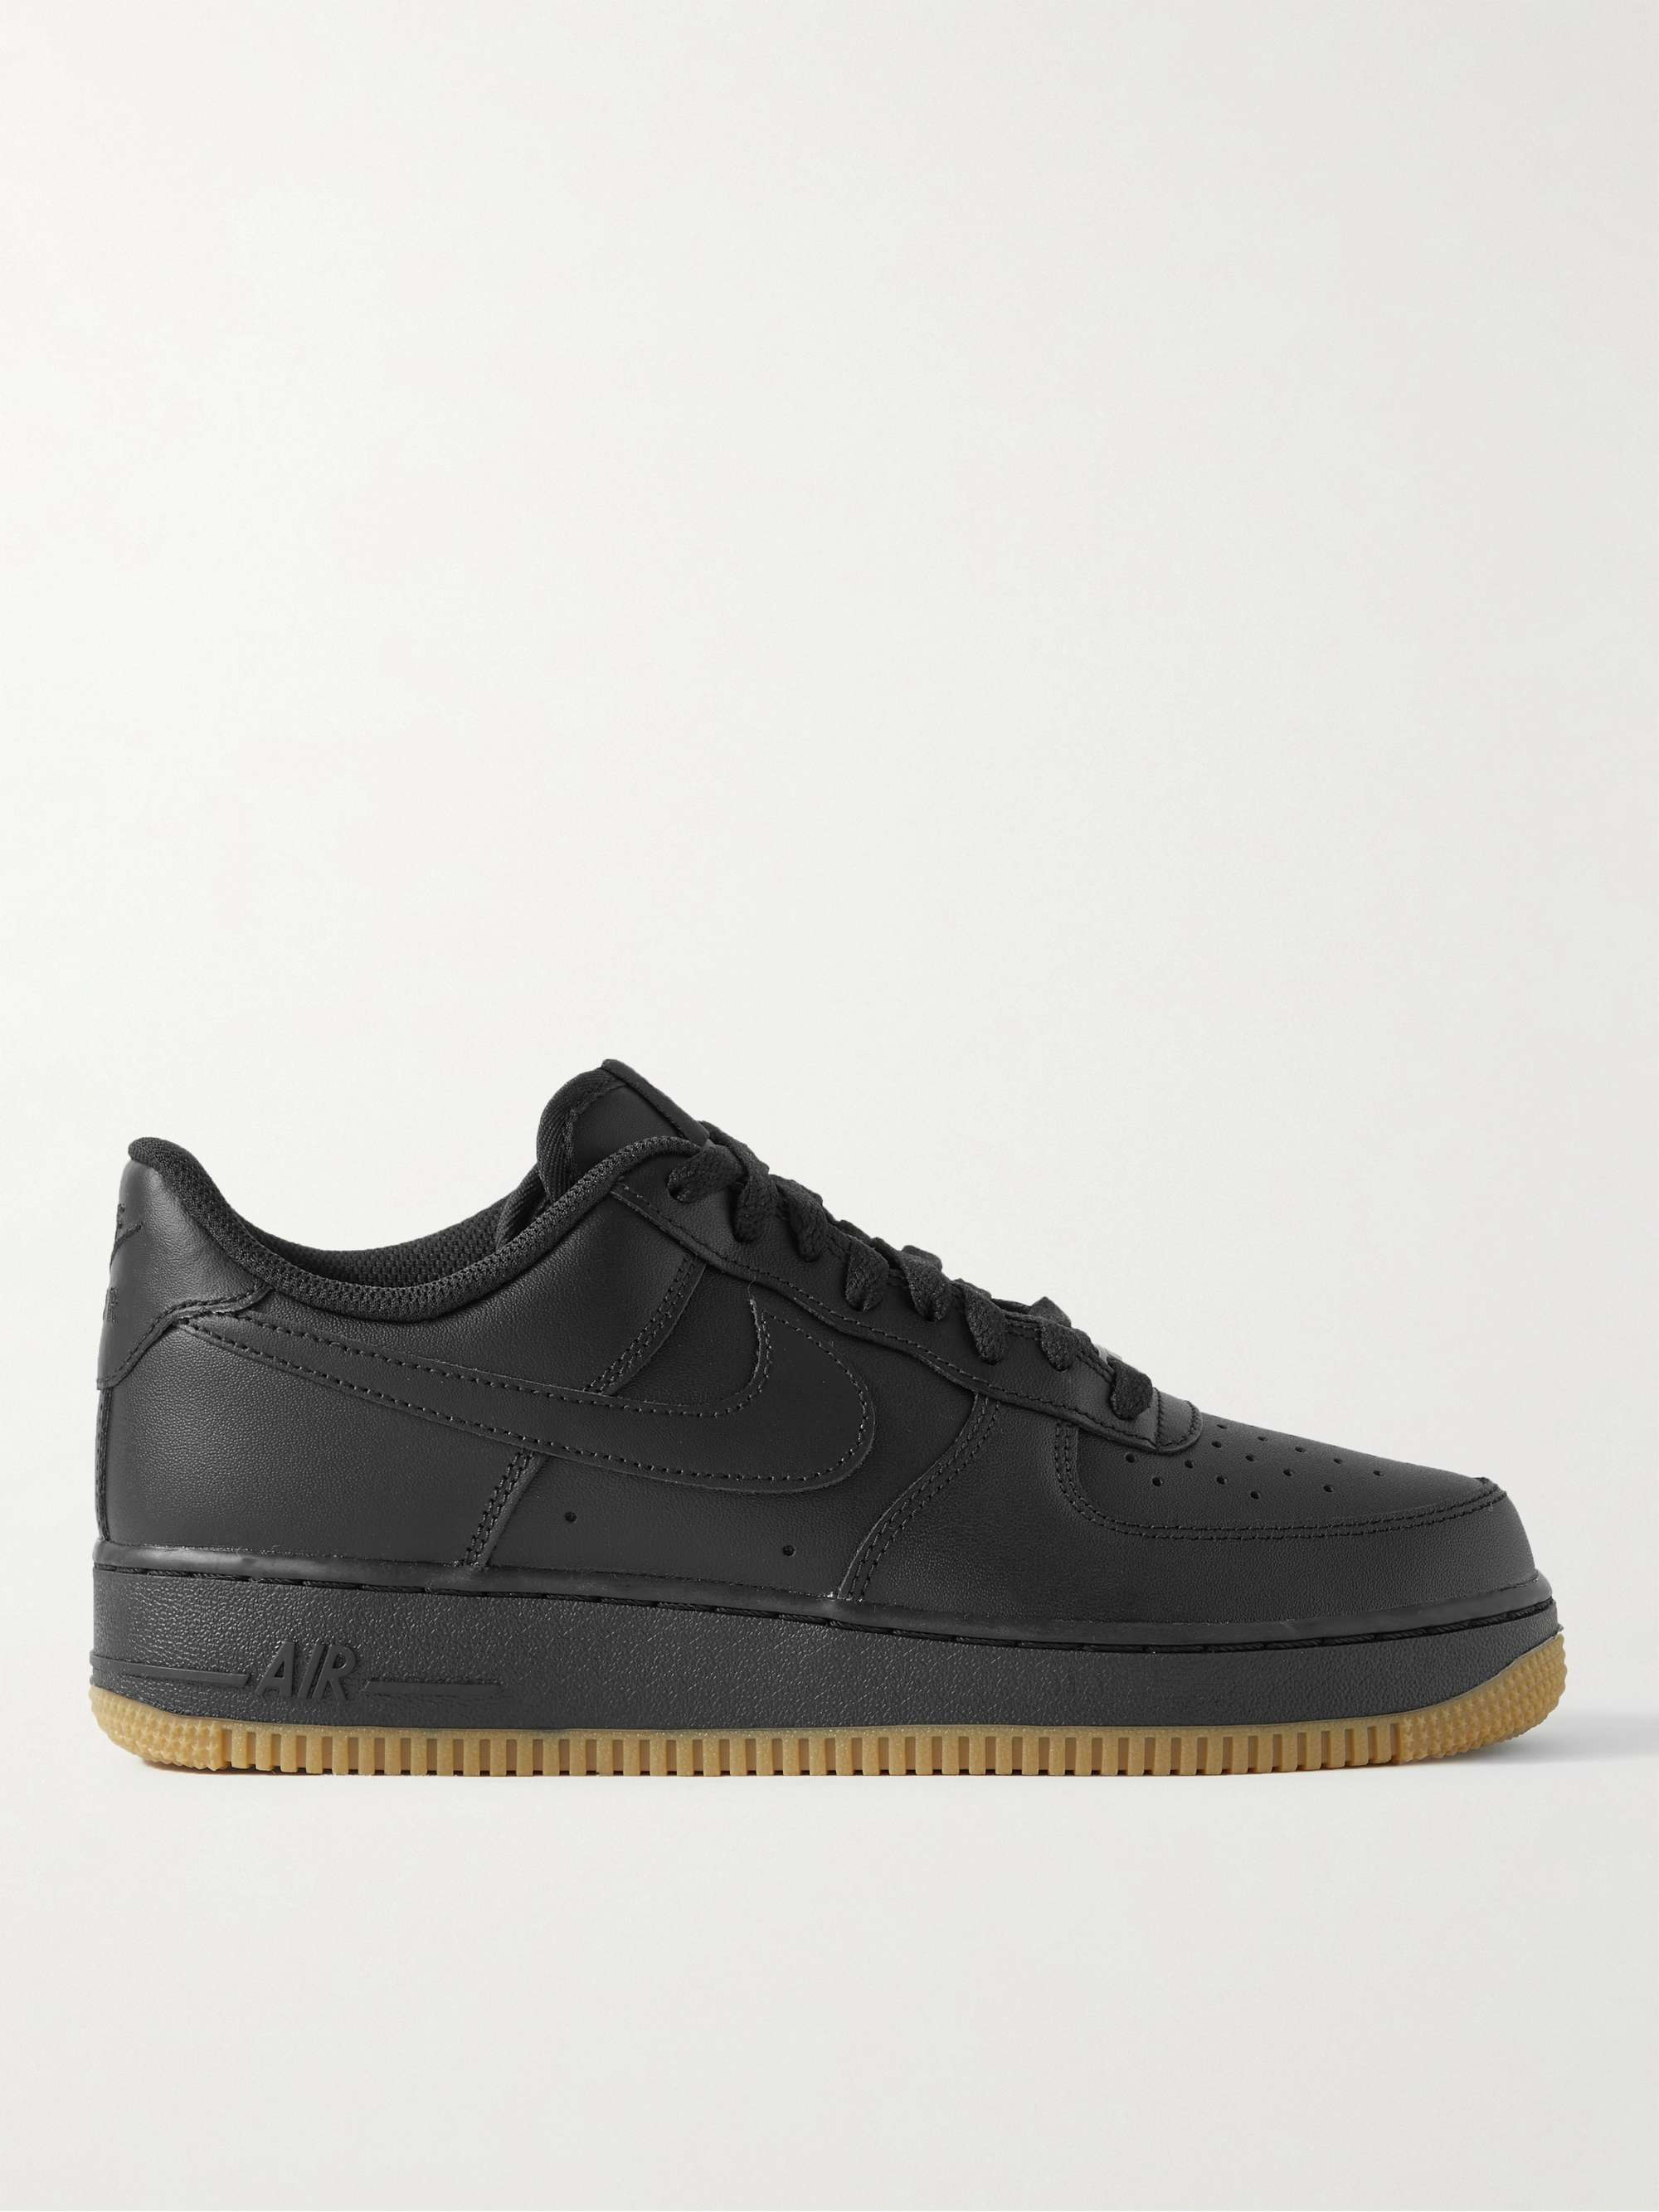 Black Air Force 1 '07 Leather Sneakers | NIKE | MR PORTER